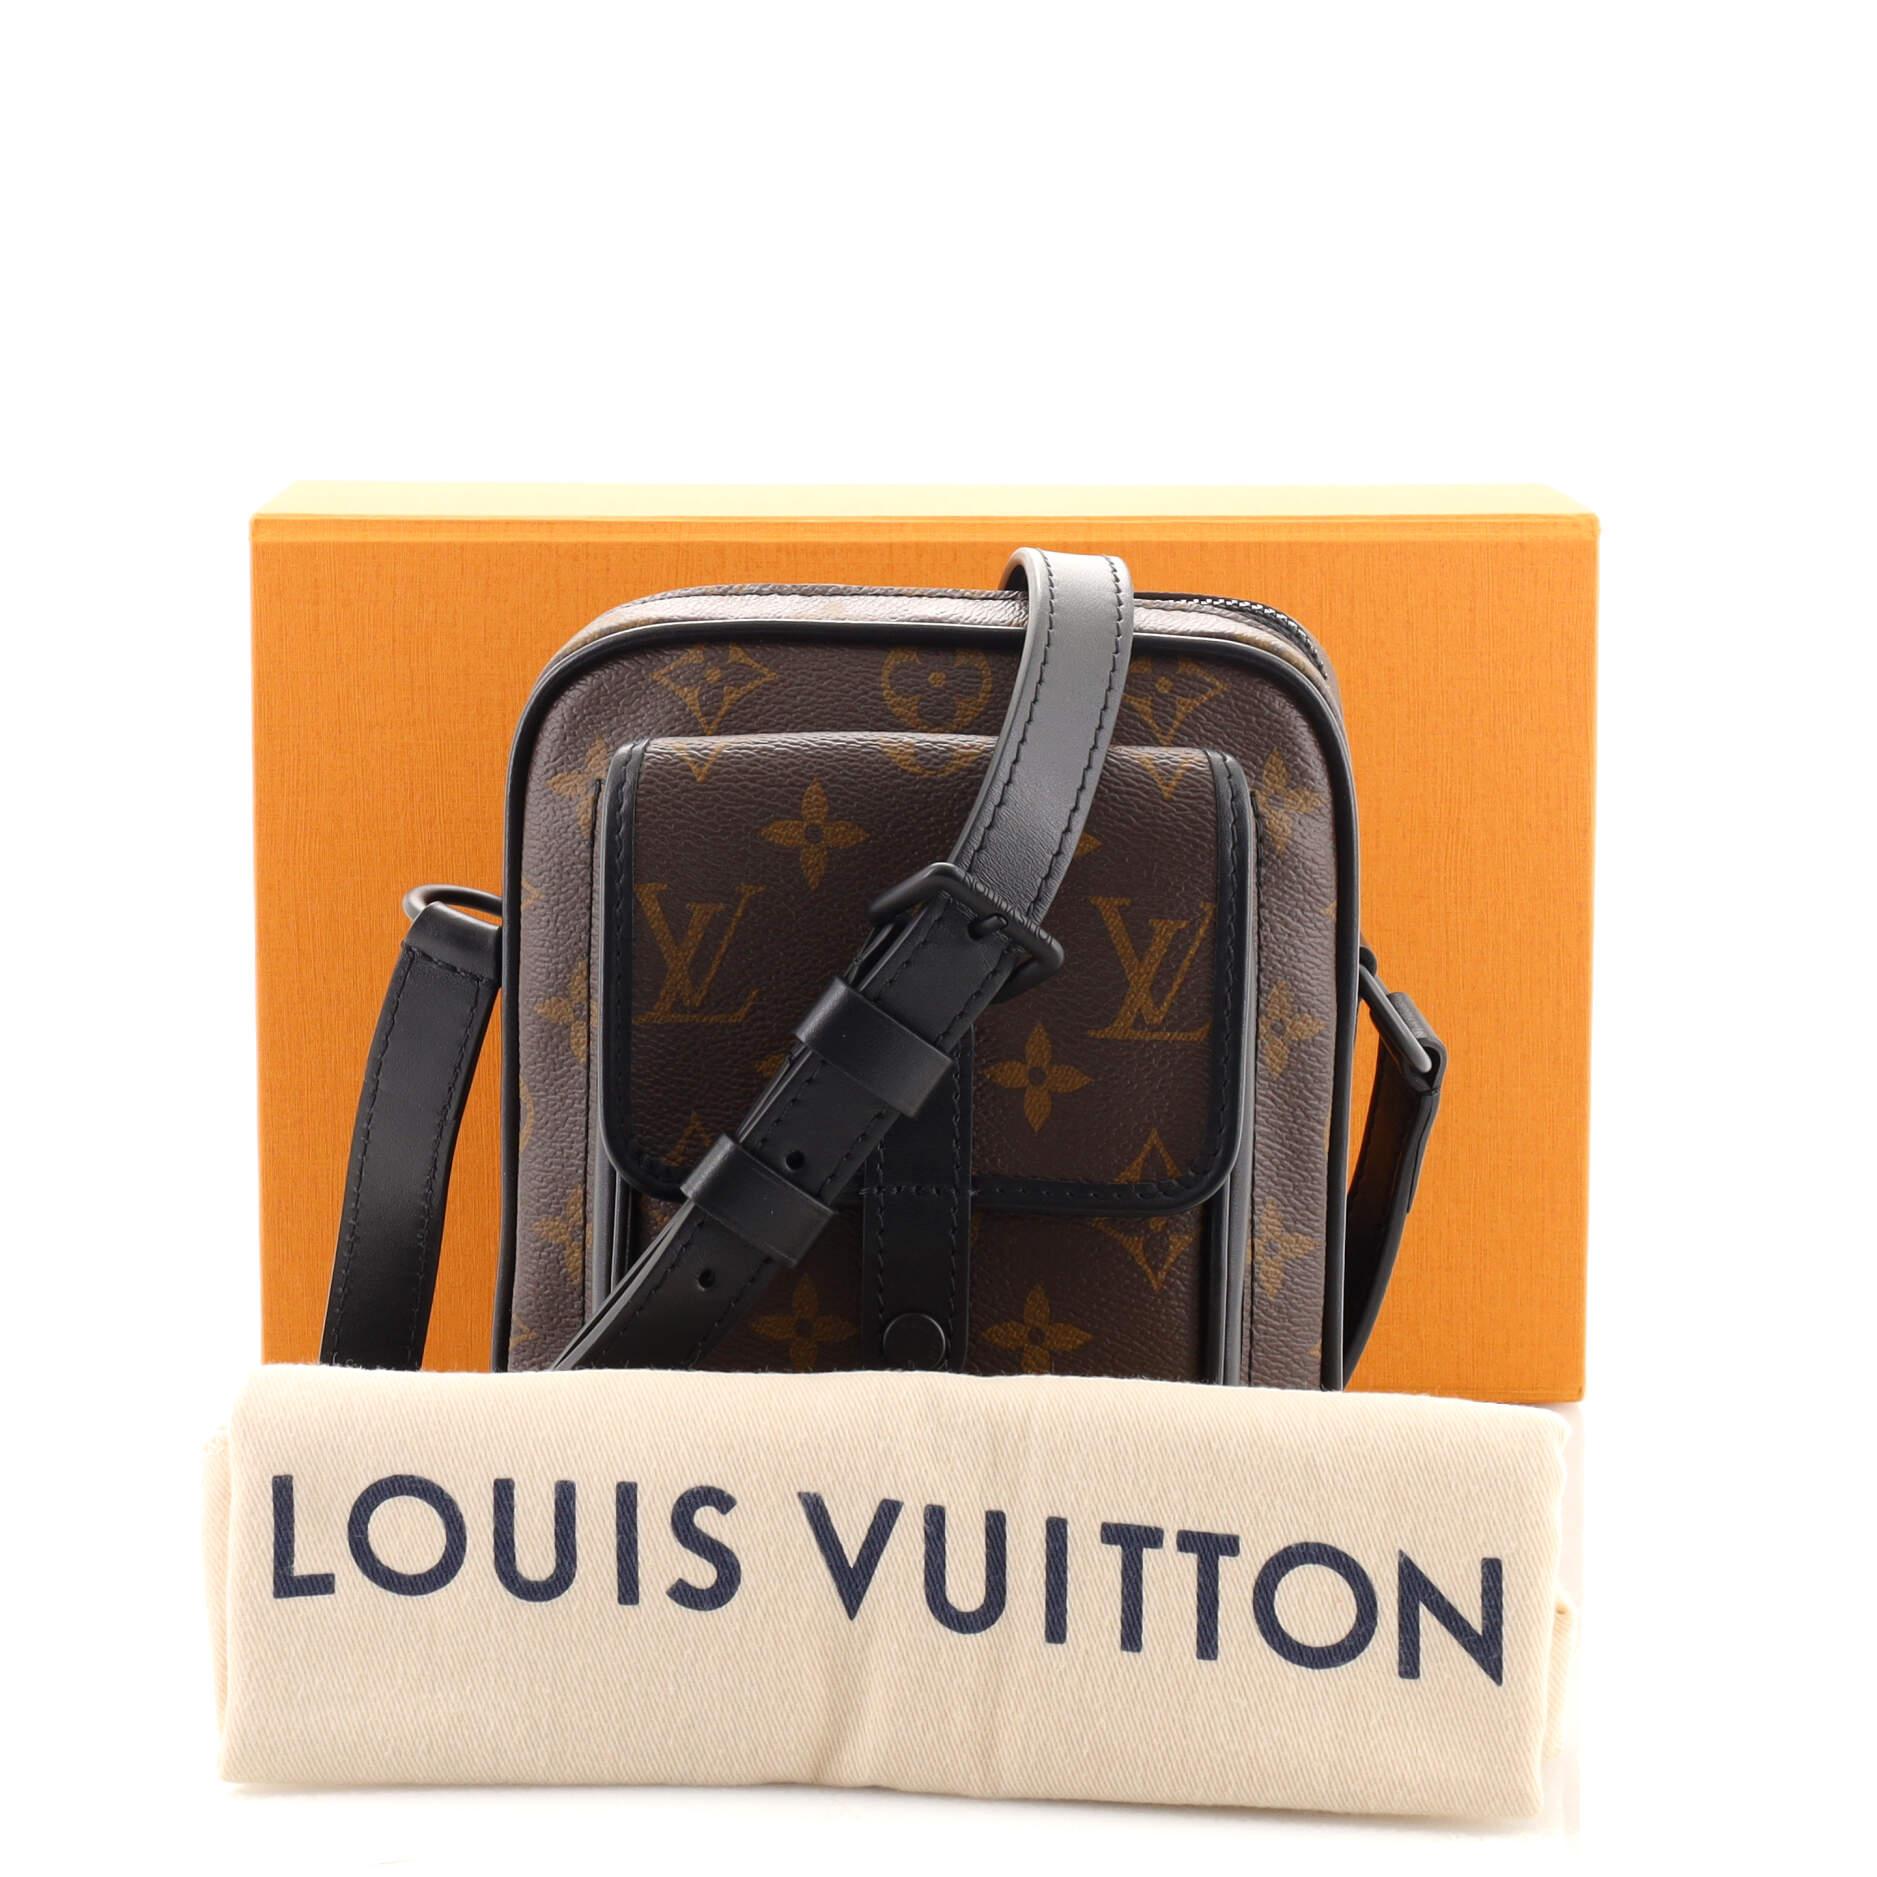 Louis Vuitton Christopher Wallet - For Sale on 1stDibs  christopher wearable  wallet, lv fastline wearable wallet, louis vuitton christopher wearable  wallet